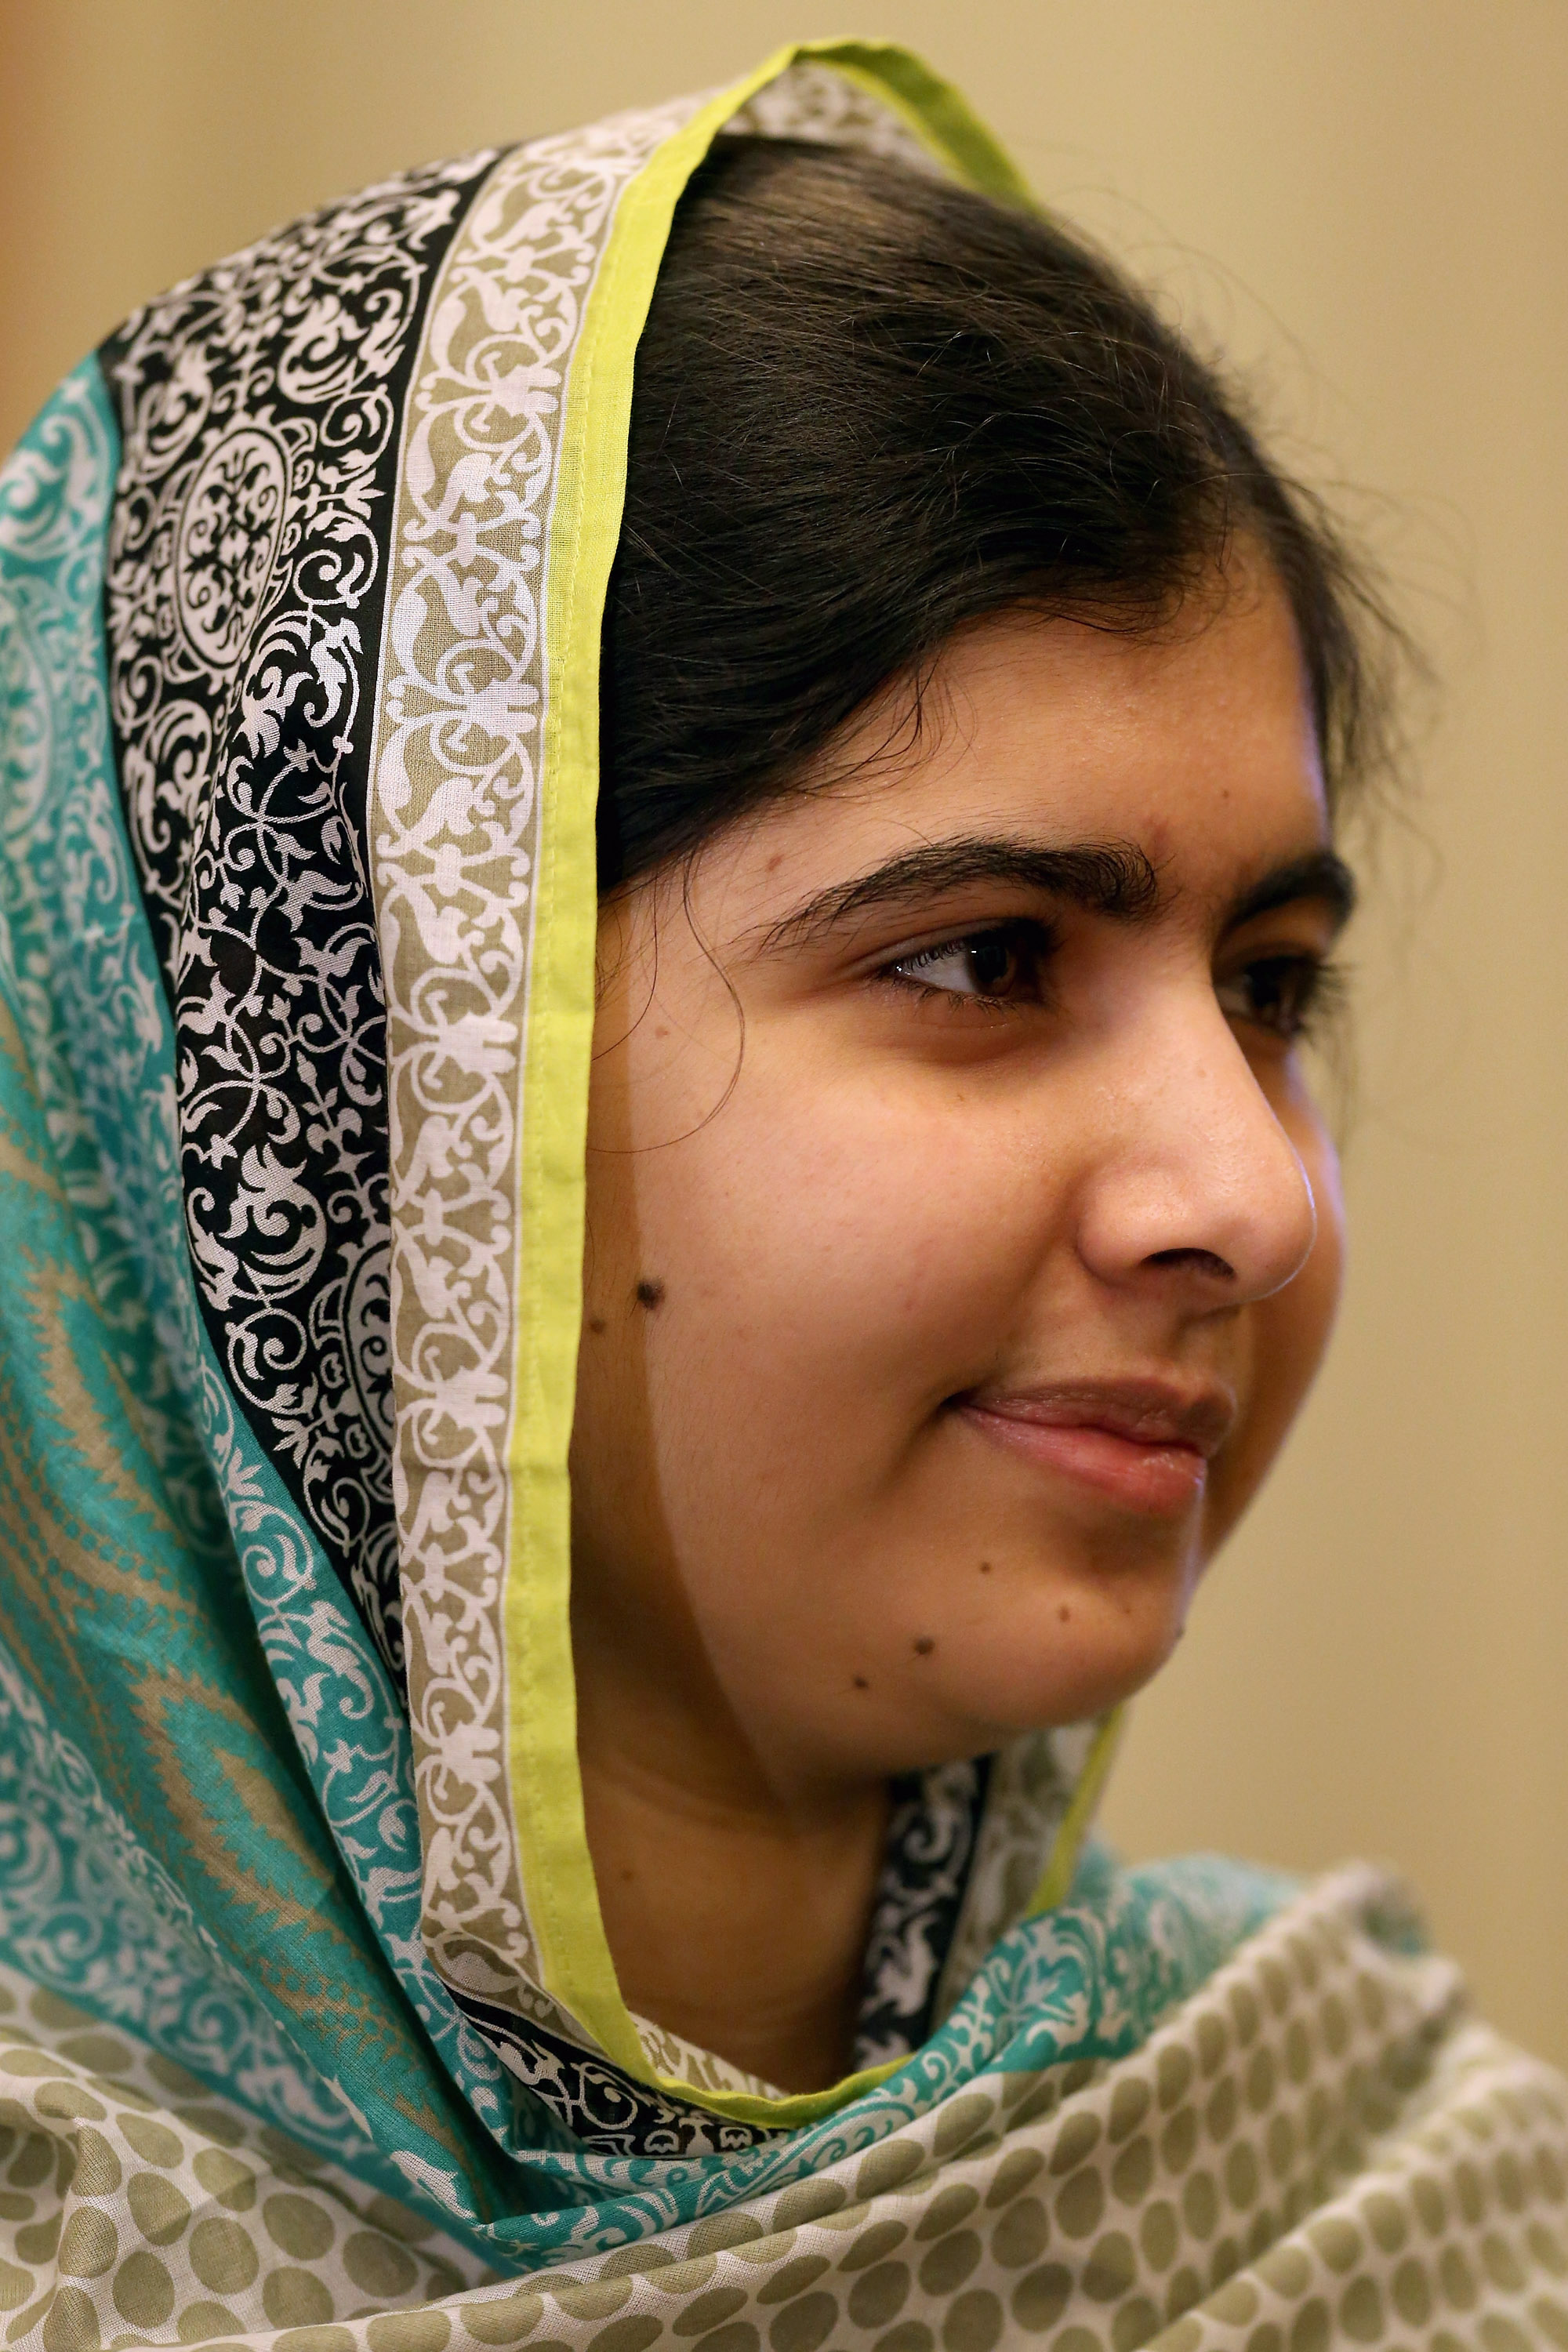 2014 Nobel Peace Prize Laureate Malala Yousafzai (L) poses for photographs before a meeting with Senate Minority Whip Richard Durbin (D-IL) about the importance of girls' education and the need for universal secondary education world-wide in his office at the U.S. Capitol June 23, 2015 in Washington, DC. (Chip Somodevilla&mdash;Getty Images)